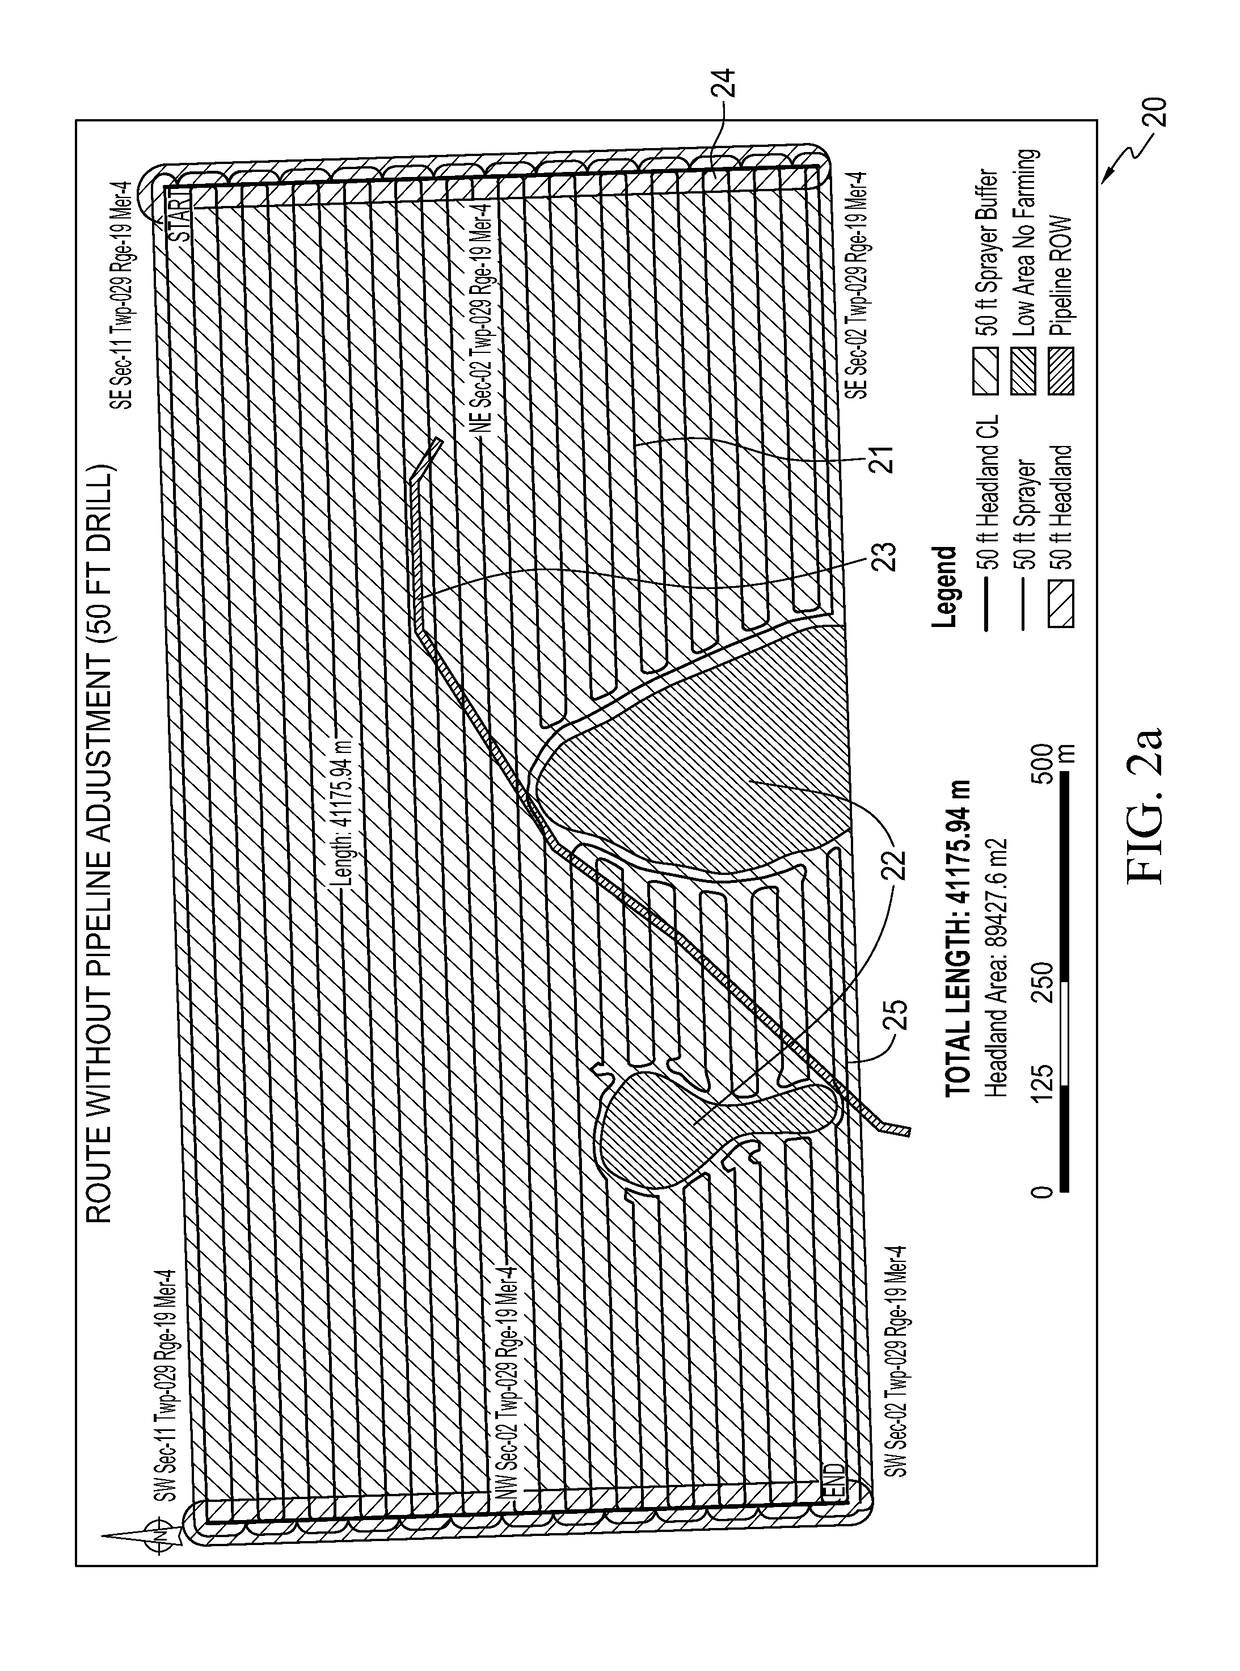 Method and system for determining optimized travel path for agricultural implement on land with obstacle